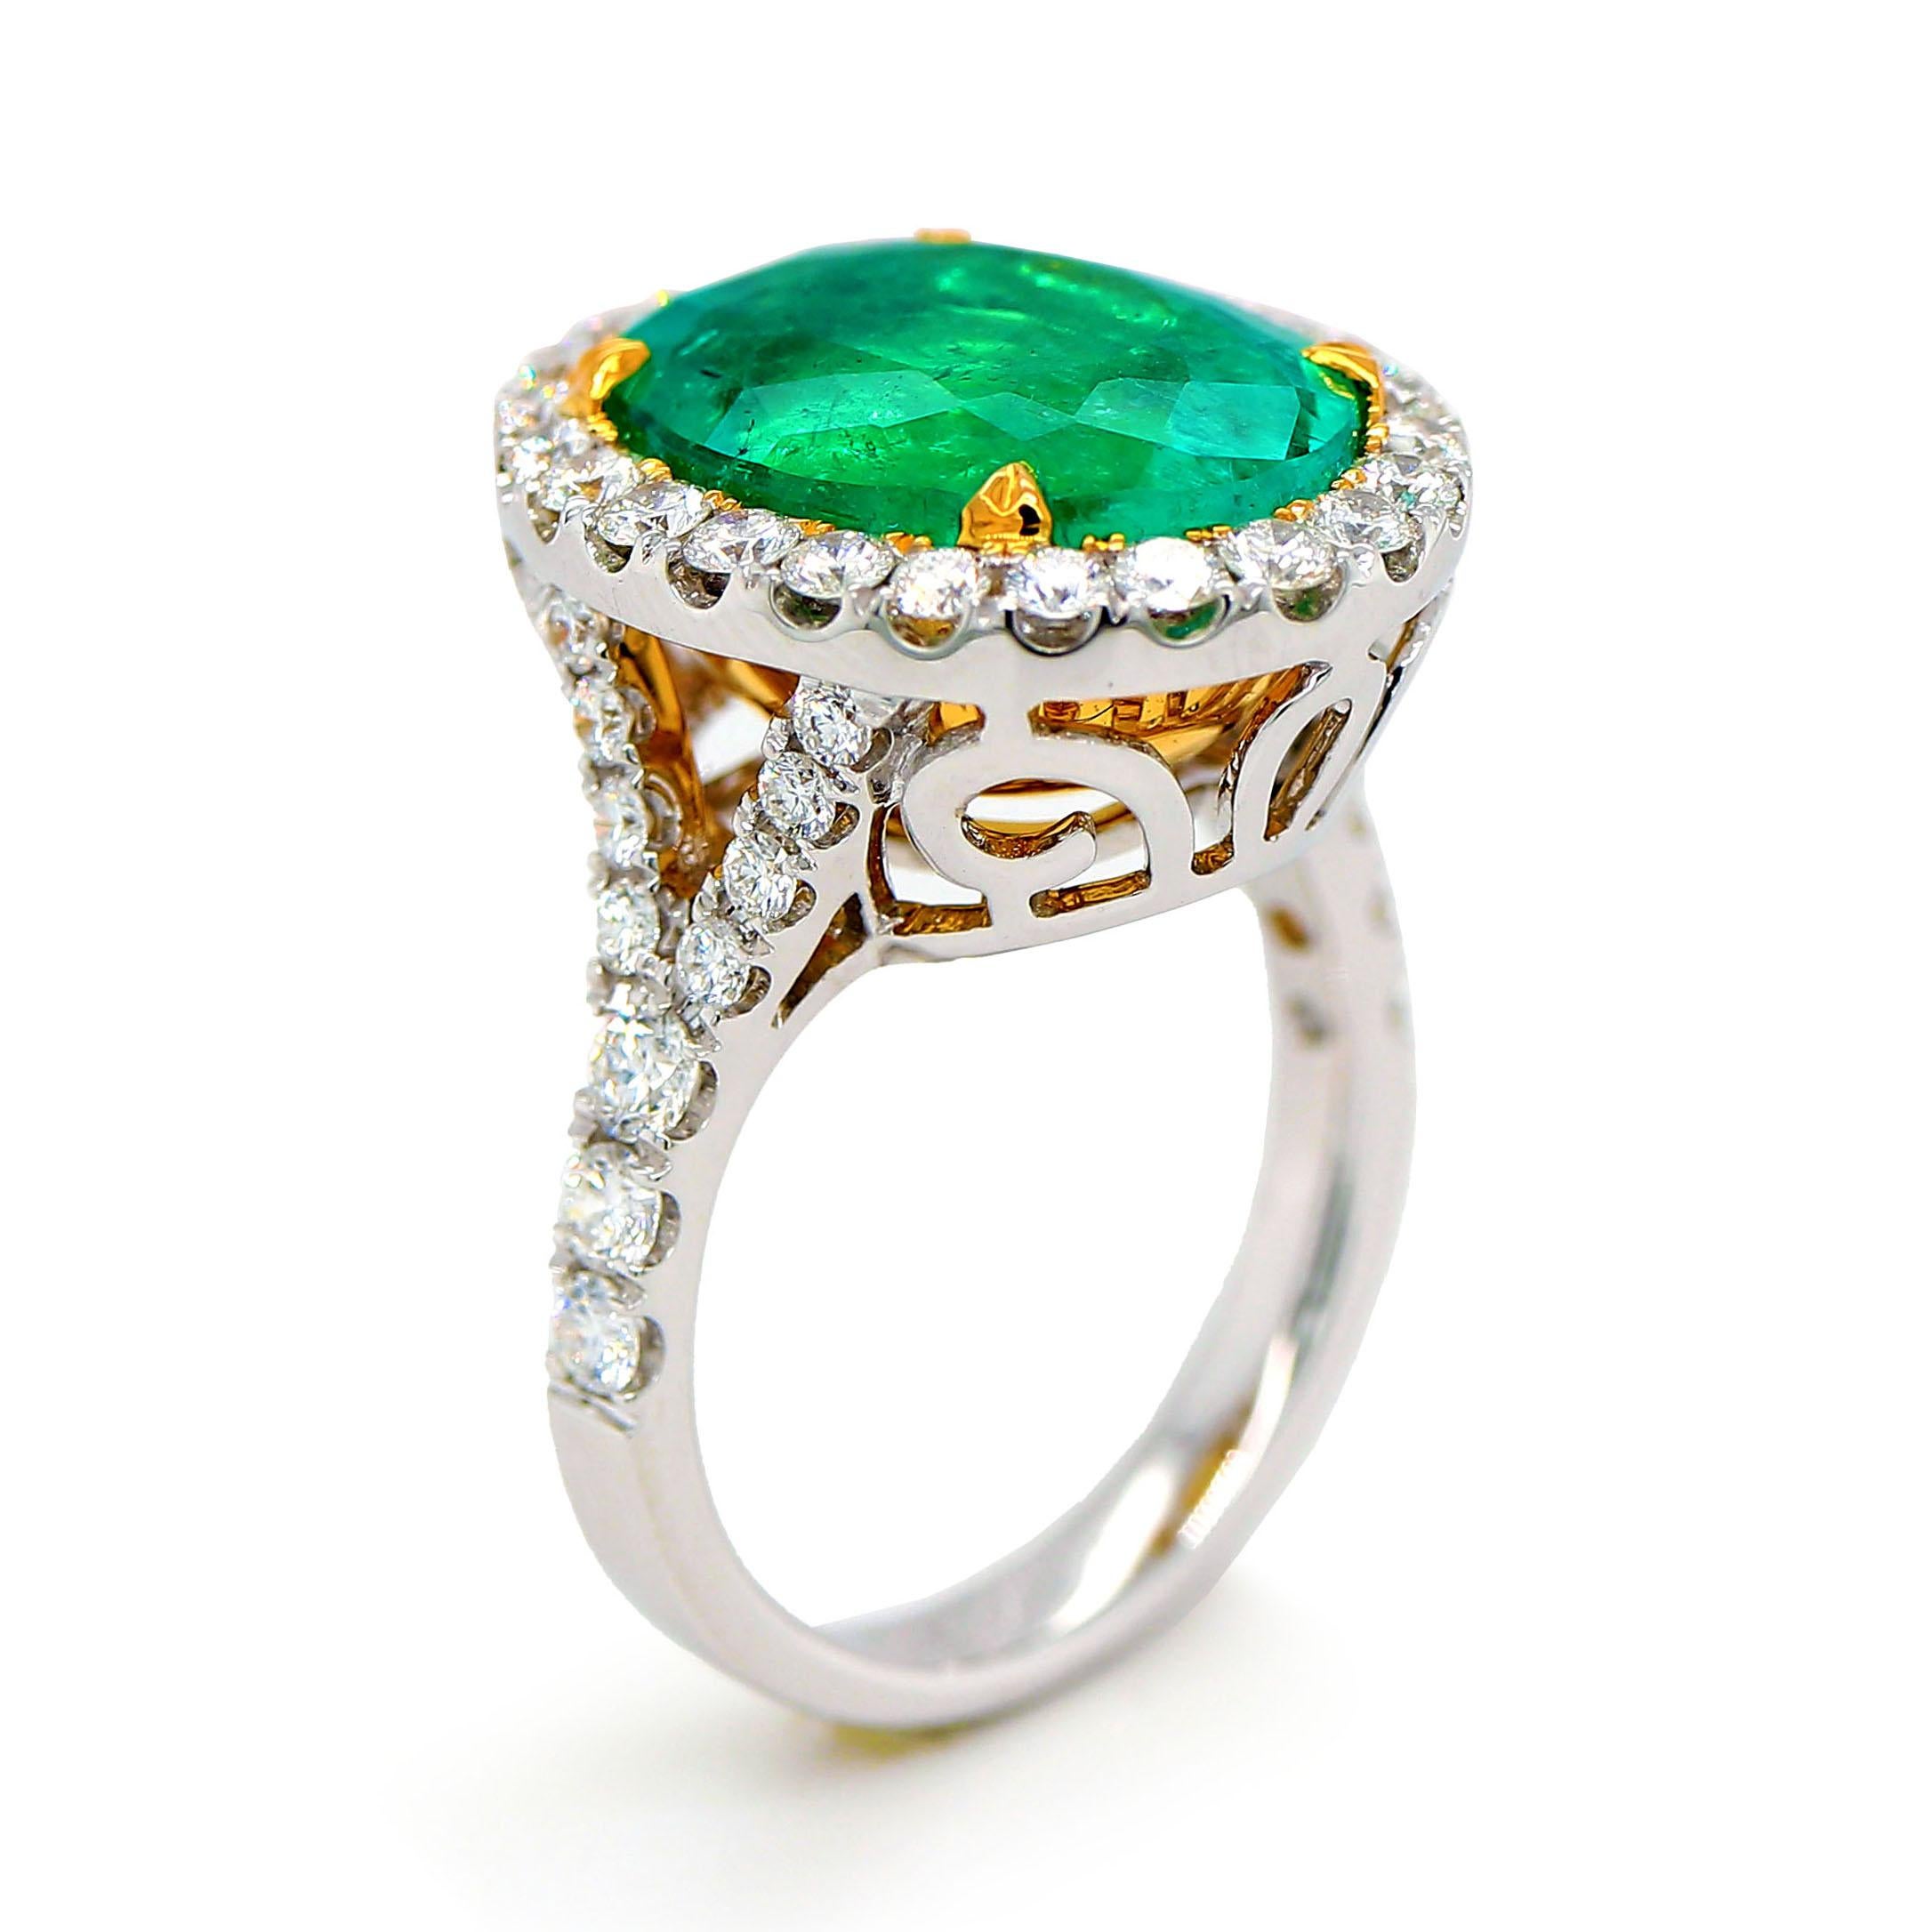 Ring containing one fine Colombian oval shape Emerald of about 8.61 carats measuring 15.05 x 11.98 x 8.17mm. The Emerald is surrounded by 46 round brilliant cut Diamonds of about 1.37 carats with a clarity of VS and color G. All stones are set in